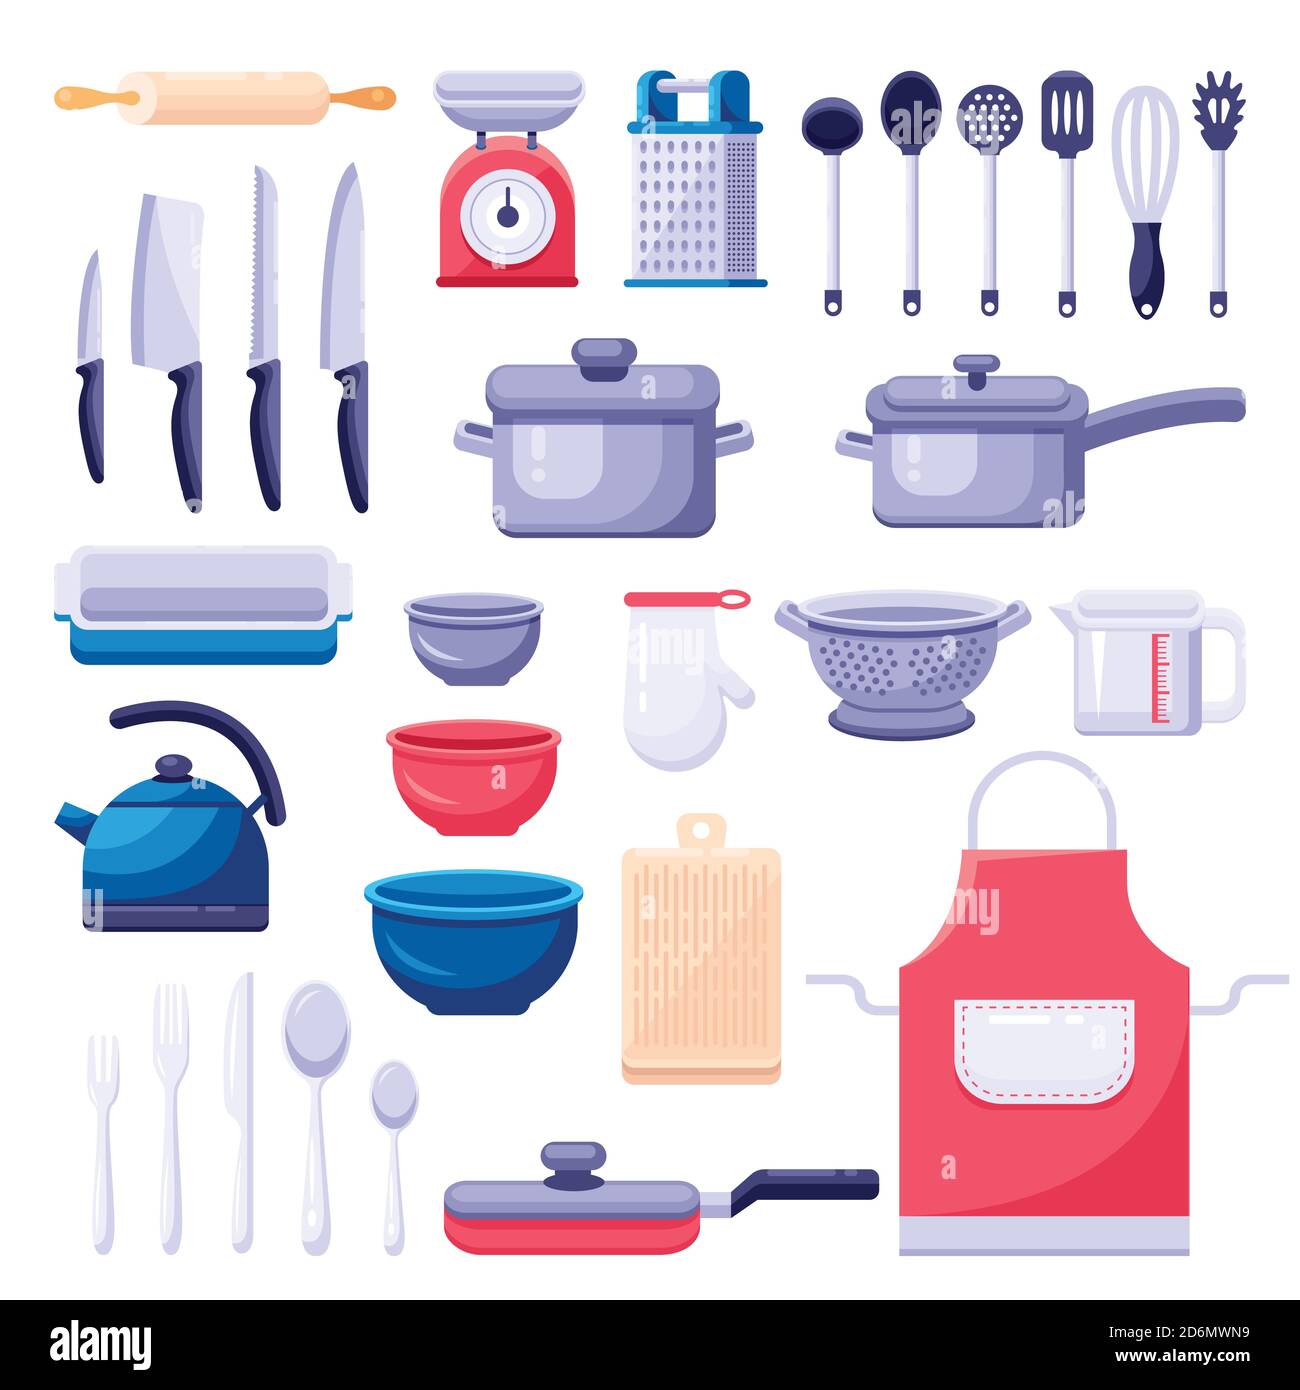 Flat Design Concept Icons Kitchen Utensils Chef Cooking Tools